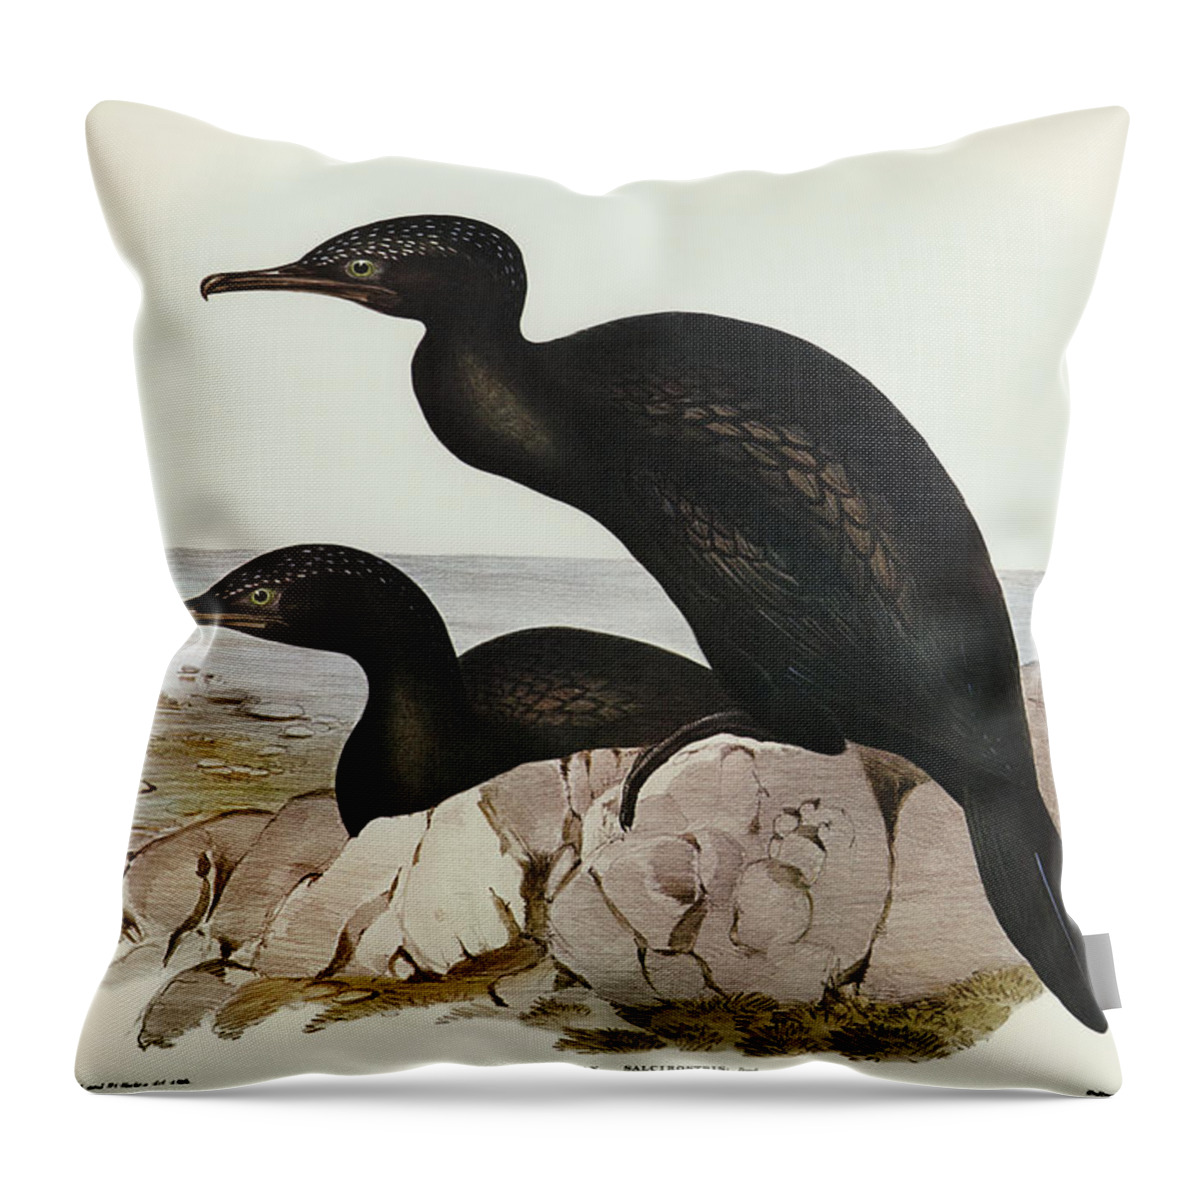 Groove-billed Cormorant Throw Pillow featuring the drawing Groove-billed Cormorant, Phalacrocorax sulcirostris by John Gould